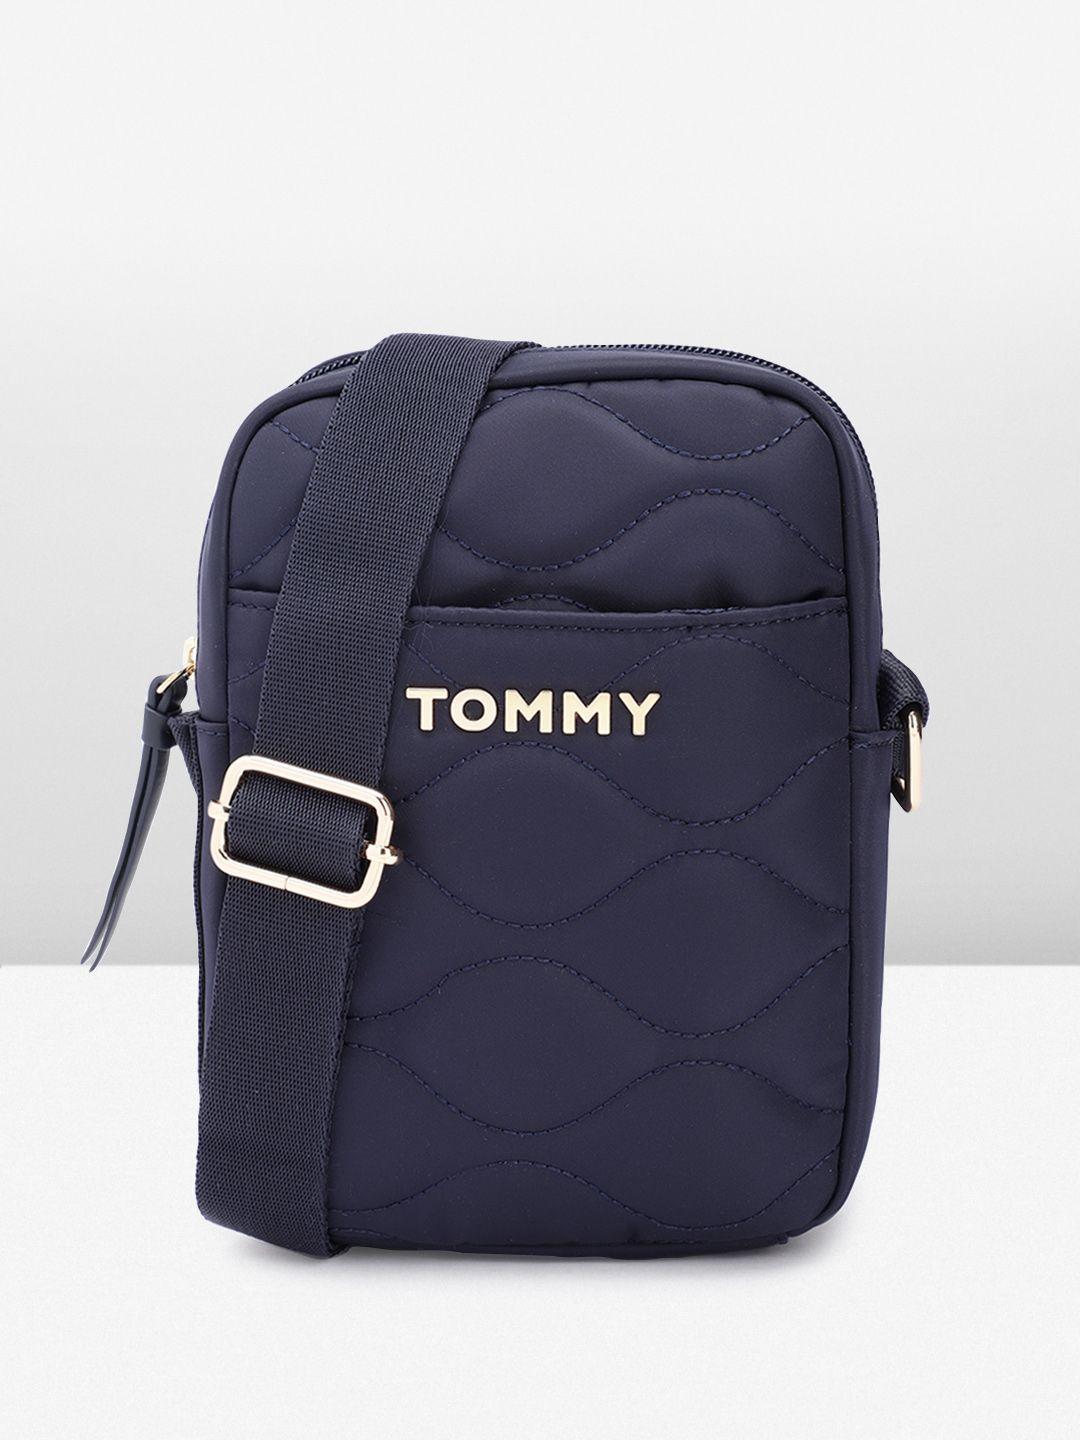 tommy hilfiger structured sling bag with quilted detail